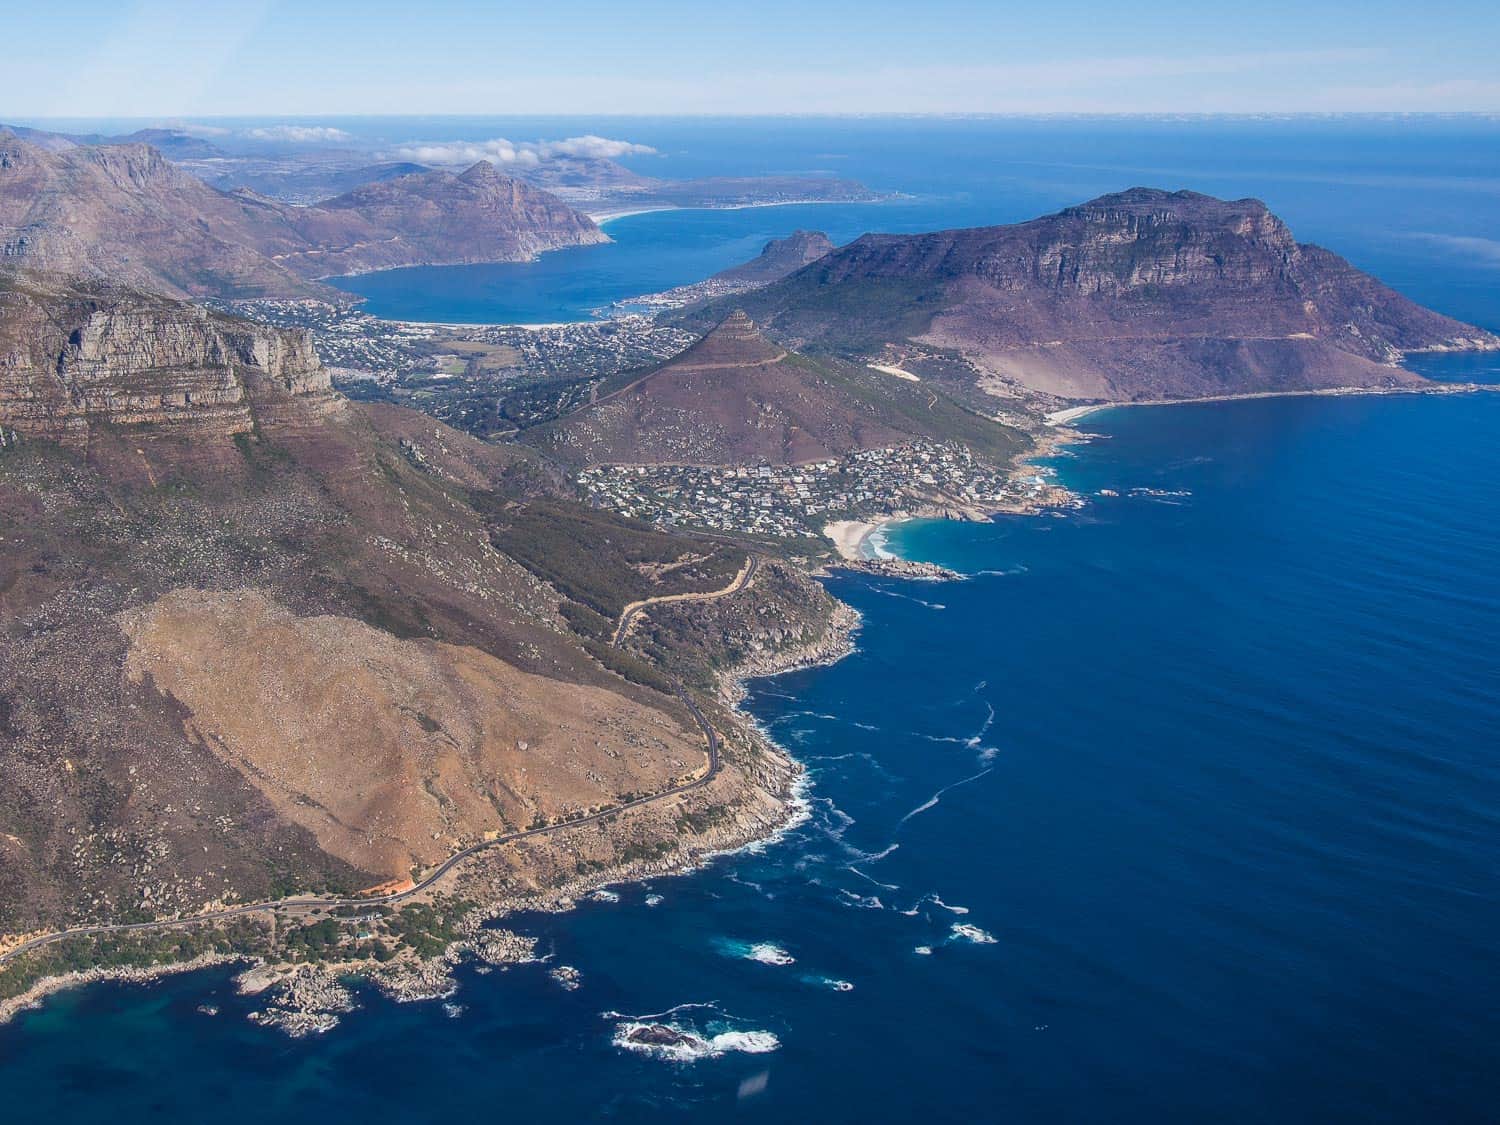 Cape Town Helicopters review: Victoria Rd and Lladudno bea